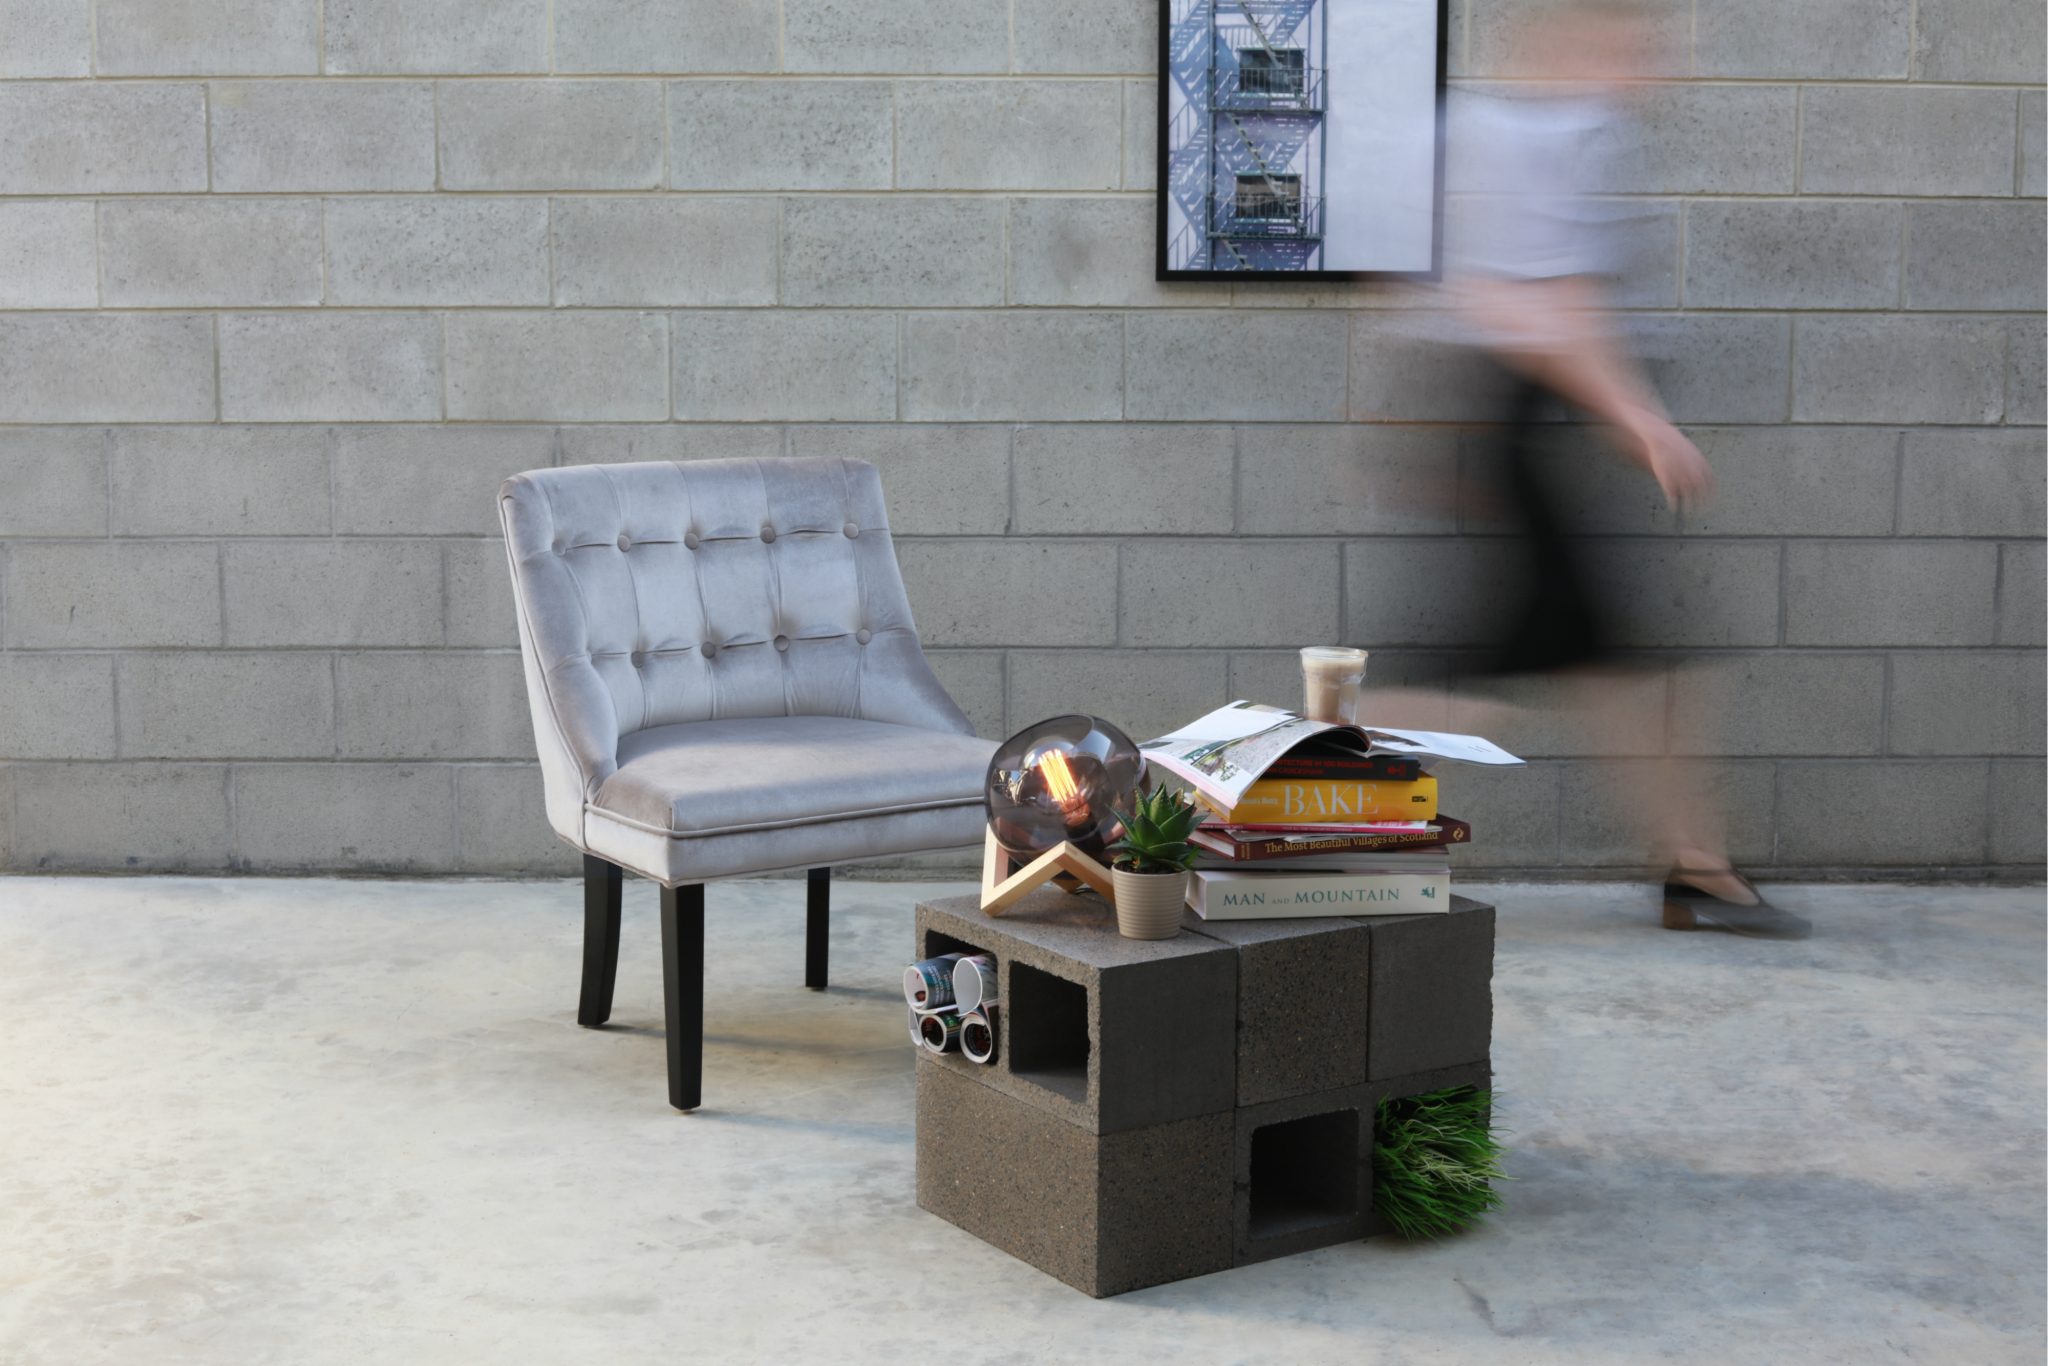 Modern_industrial_living_room_setting_with_a_person_walking_past_a_Polished_Charcoal_coloured_block_coffee_table